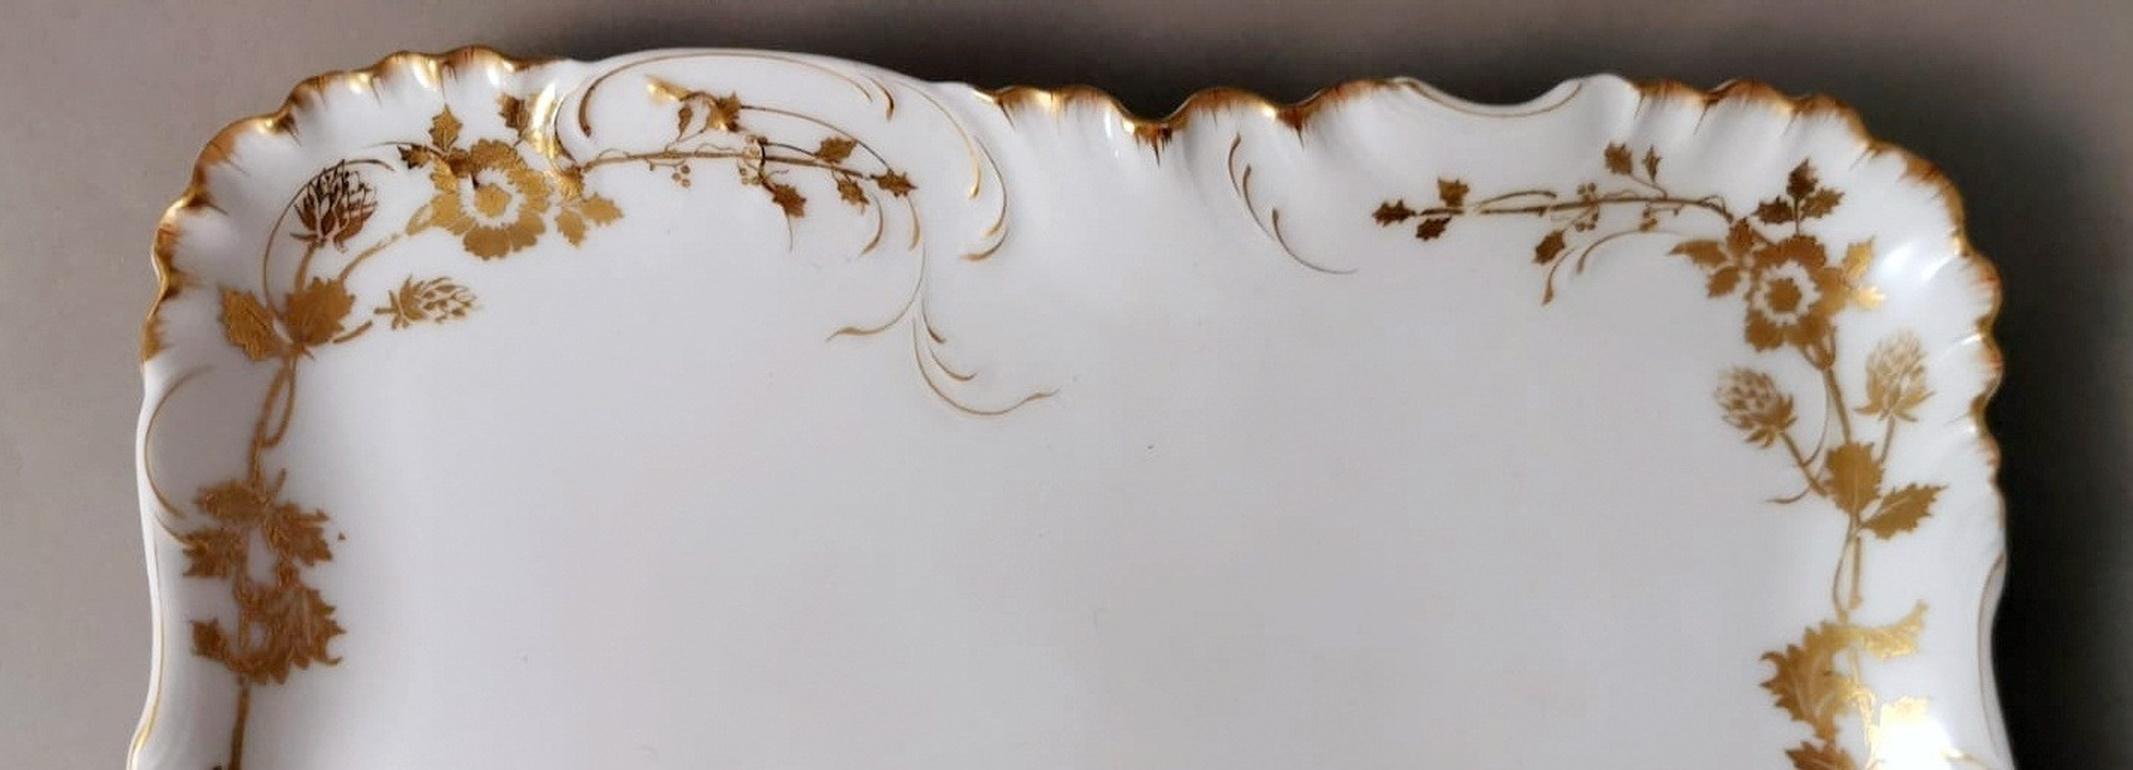 Haviland Limoges II° Pair of French Trays White Porcelain and Gold Decoration For Sale 5